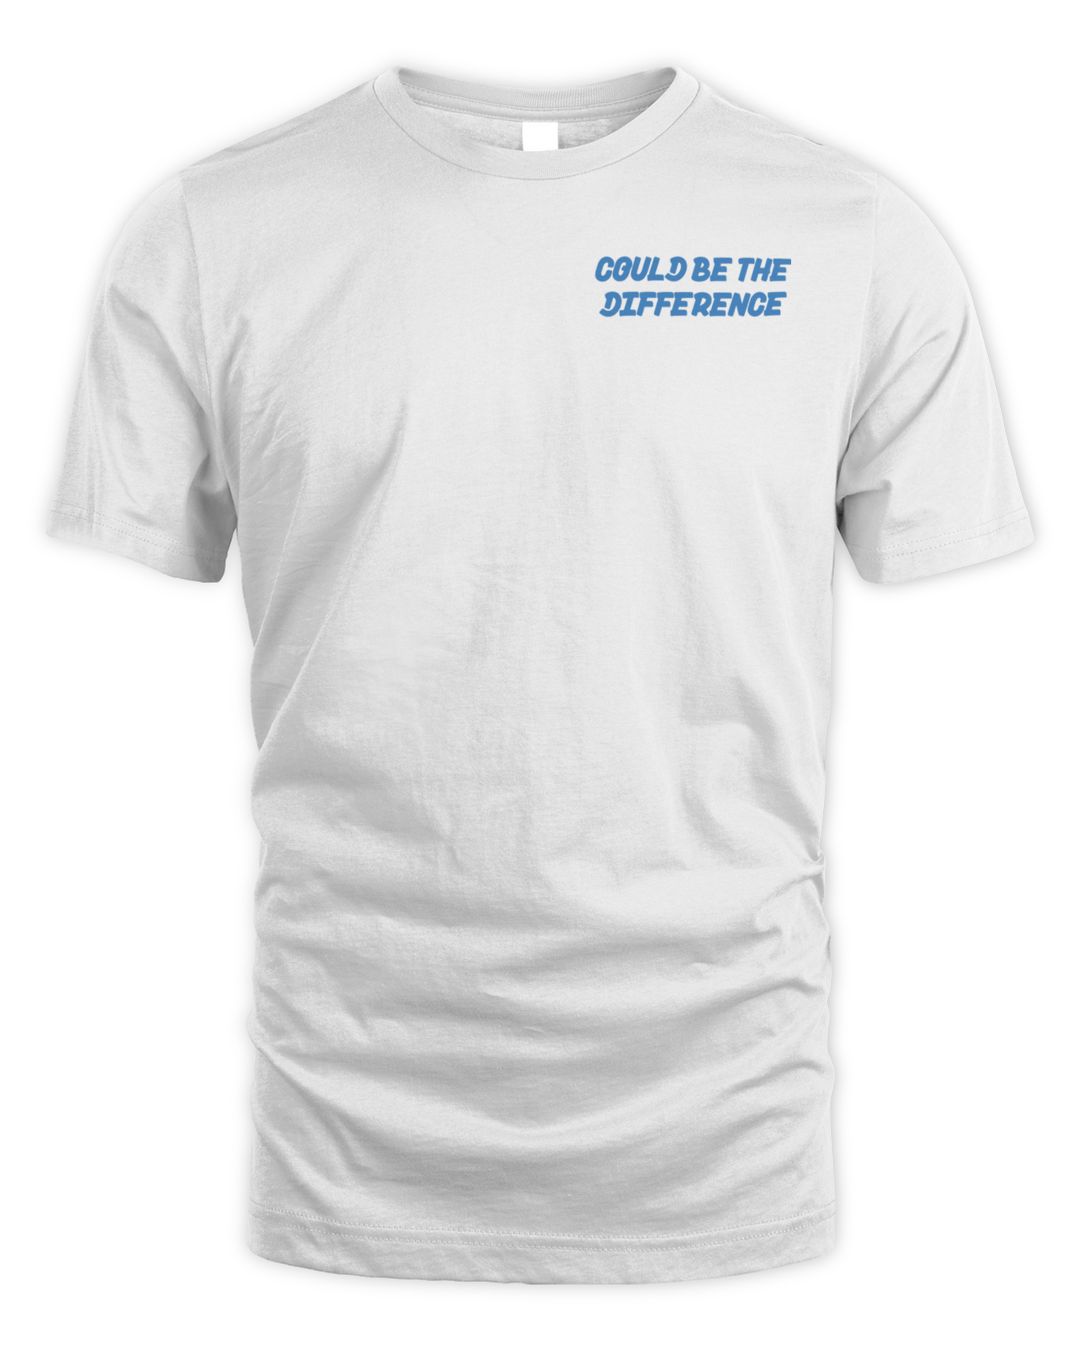 Bob Does Sports Merch Could Be Difference Shirt